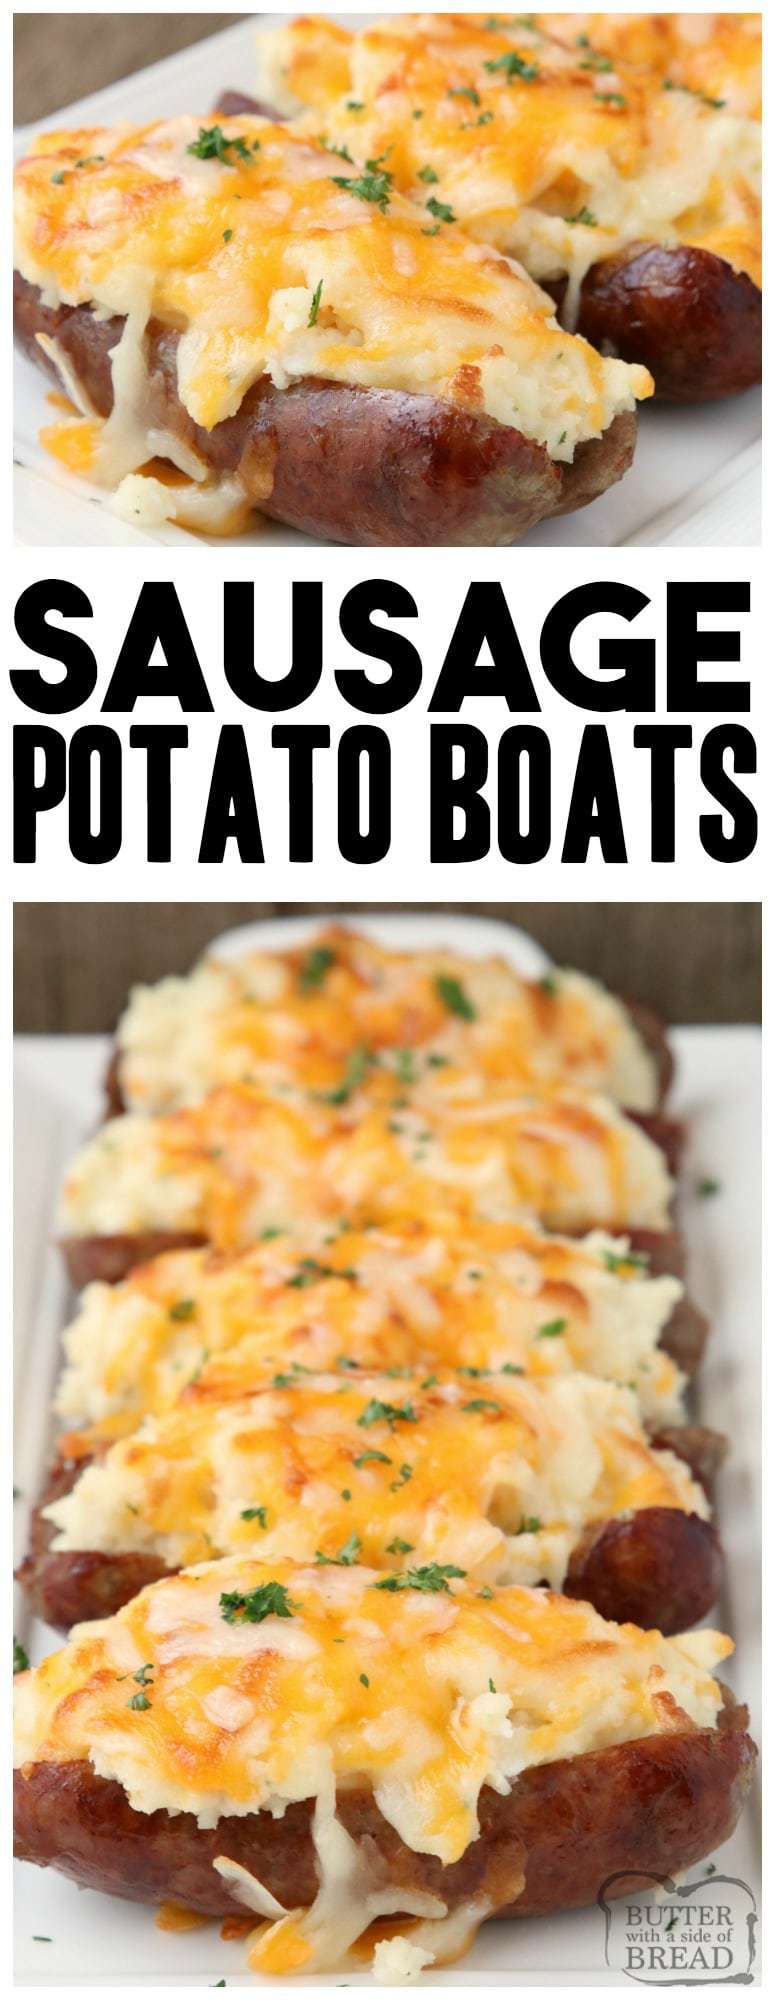 Sausage Potato Boats are an easy weeknight dinner made with juicy sausages topped with buttery mashed potatoes and lots of cheese! Simple & flavorful meal! #sausage #potato #dinner #meal from Butter With A Side of Bread